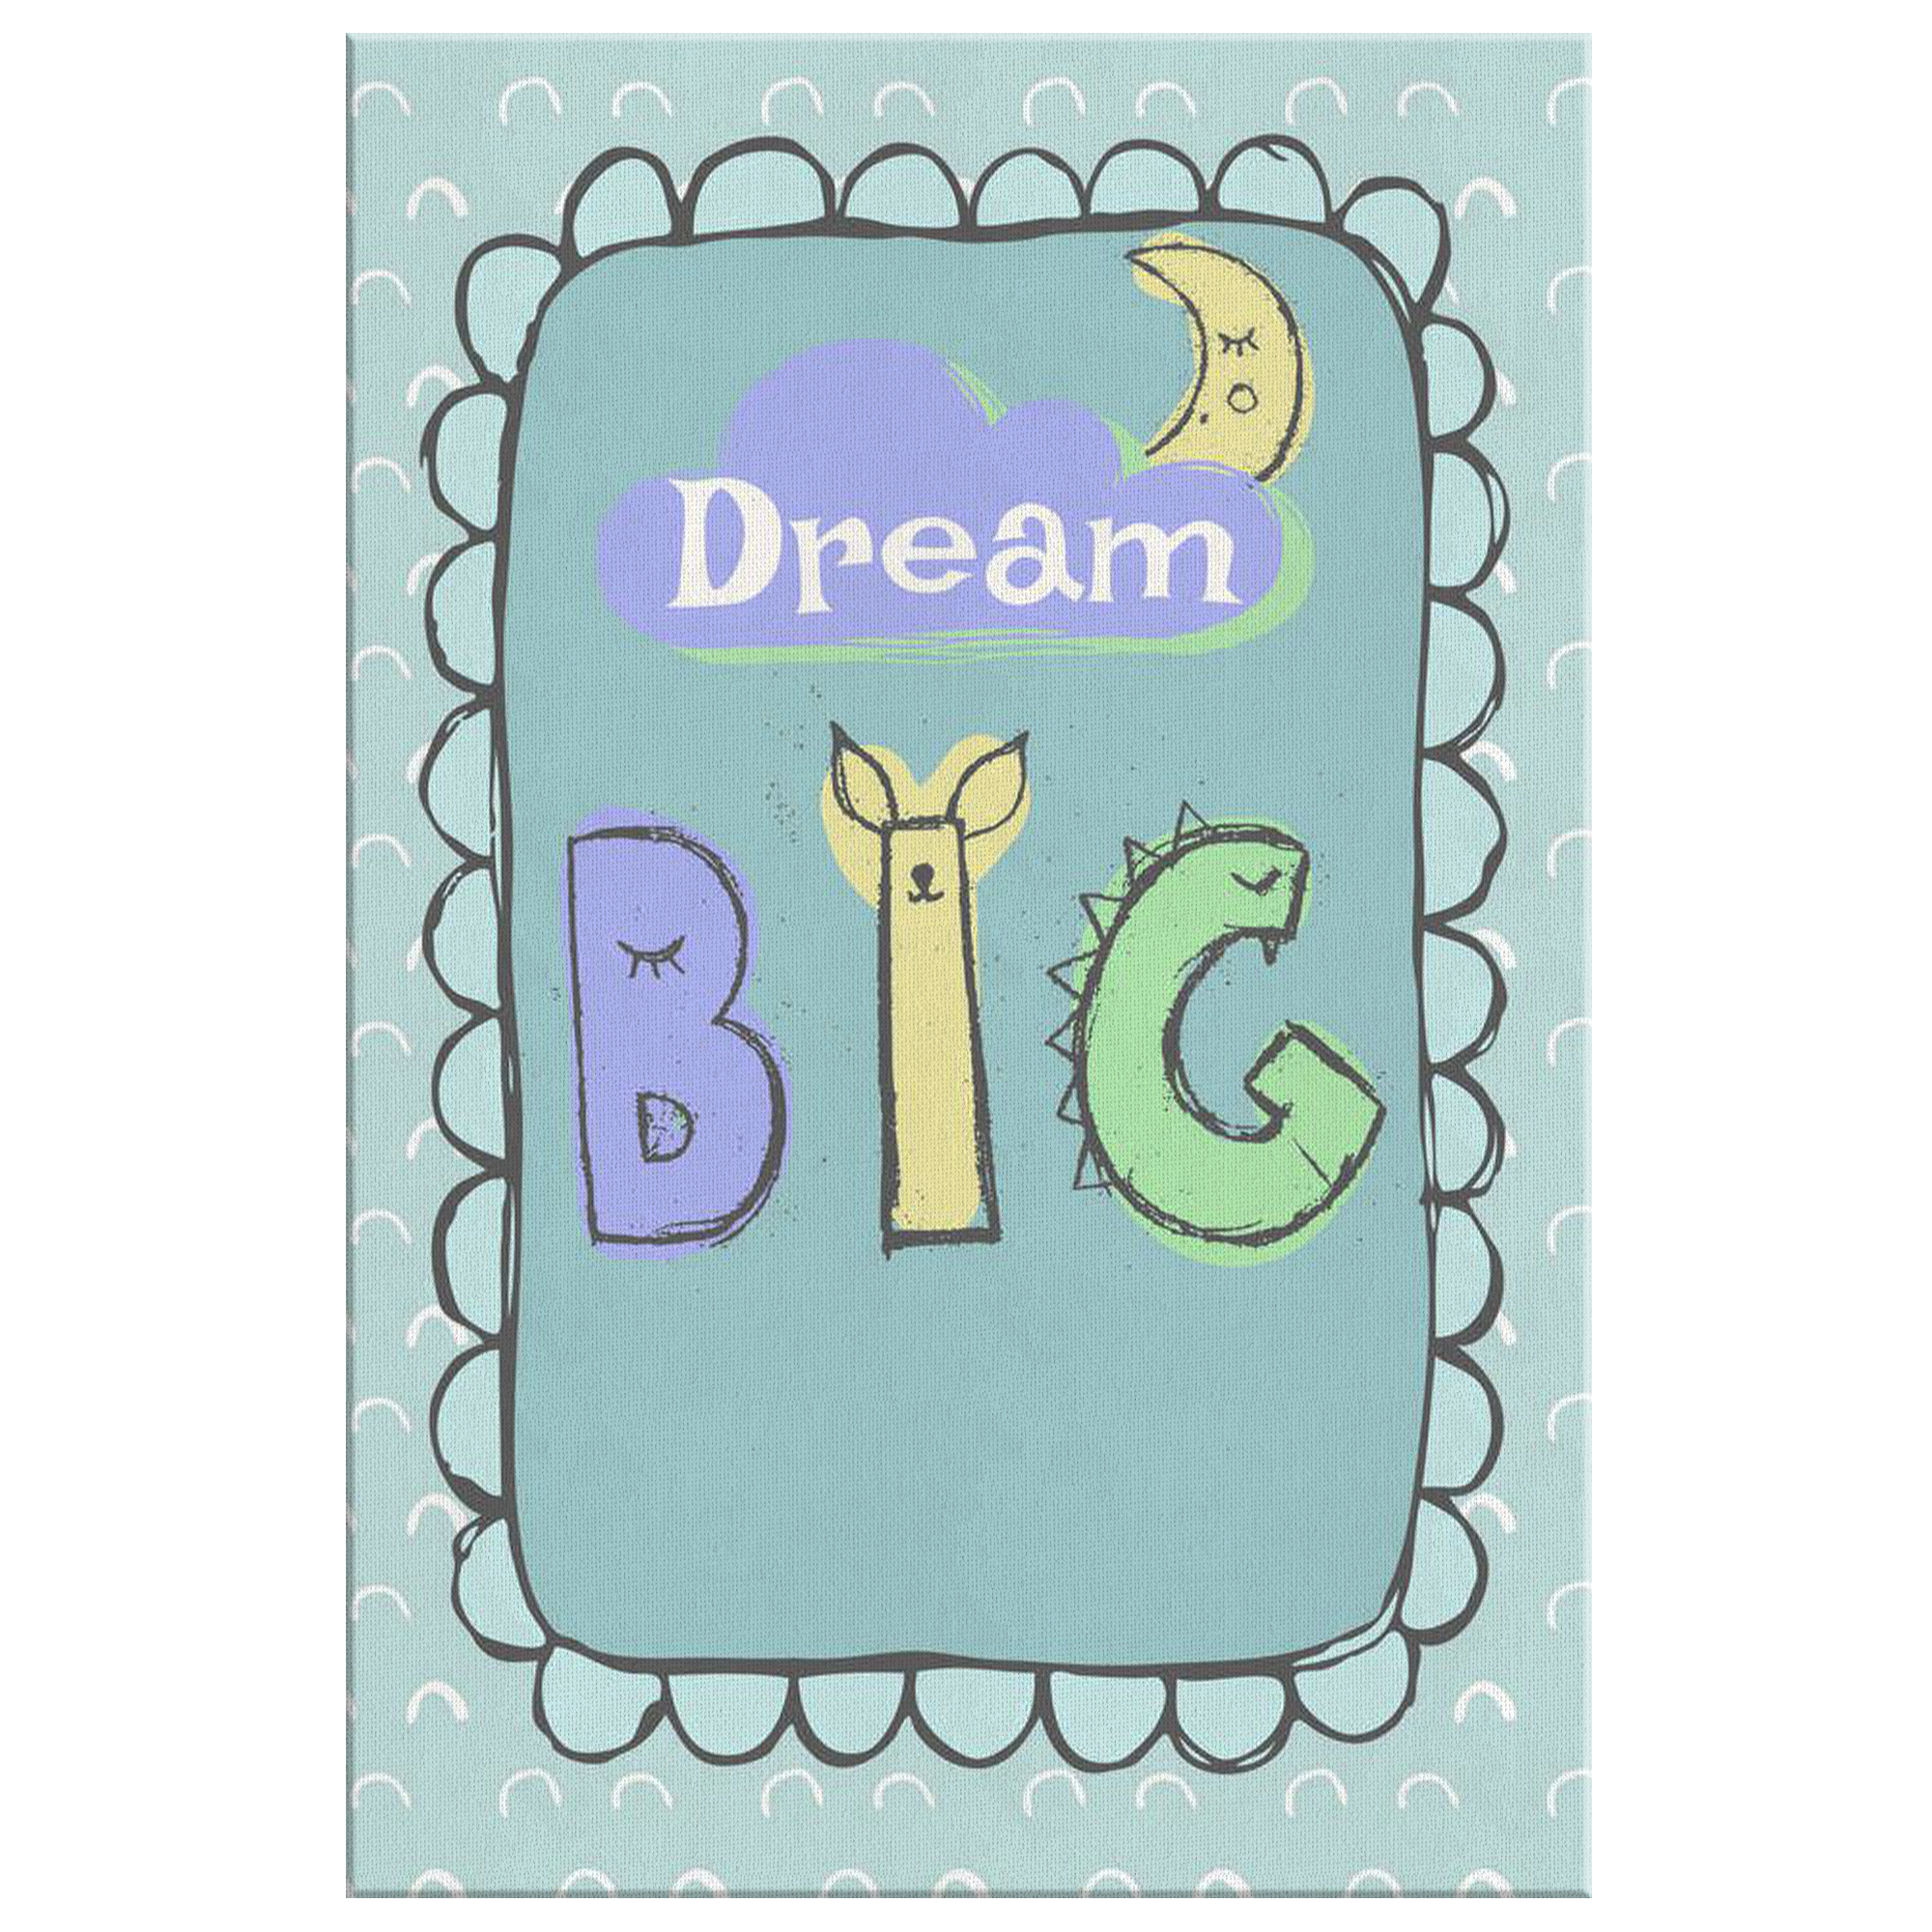 personalized dream big childs name canvas decor gift